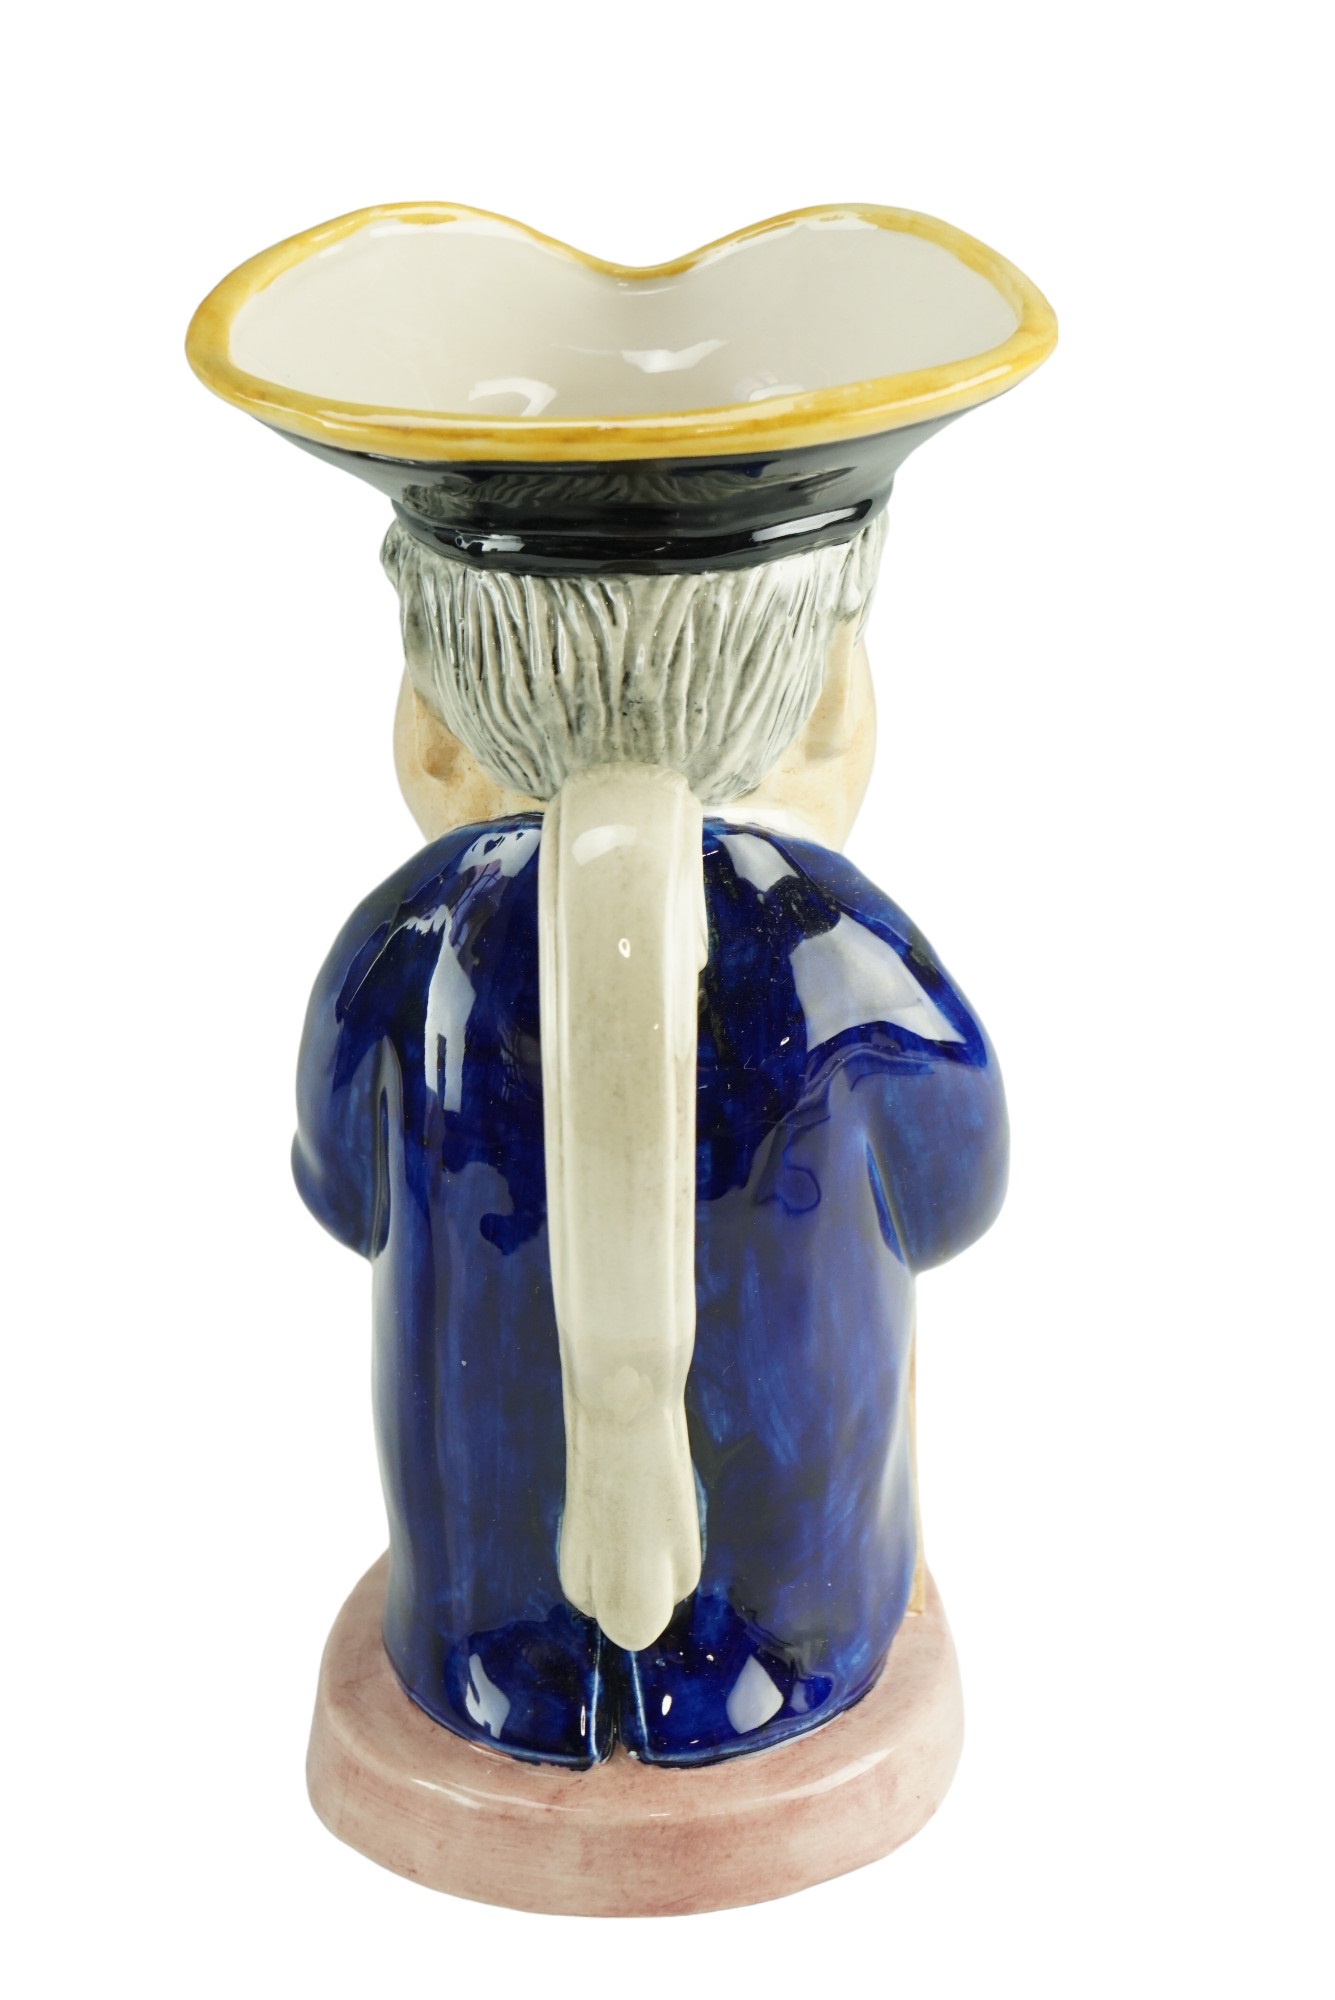 A boxed limited edition Henry Sandon character jug by Kevin Francs Ceramics, numbered 310/750, - Image 3 of 8